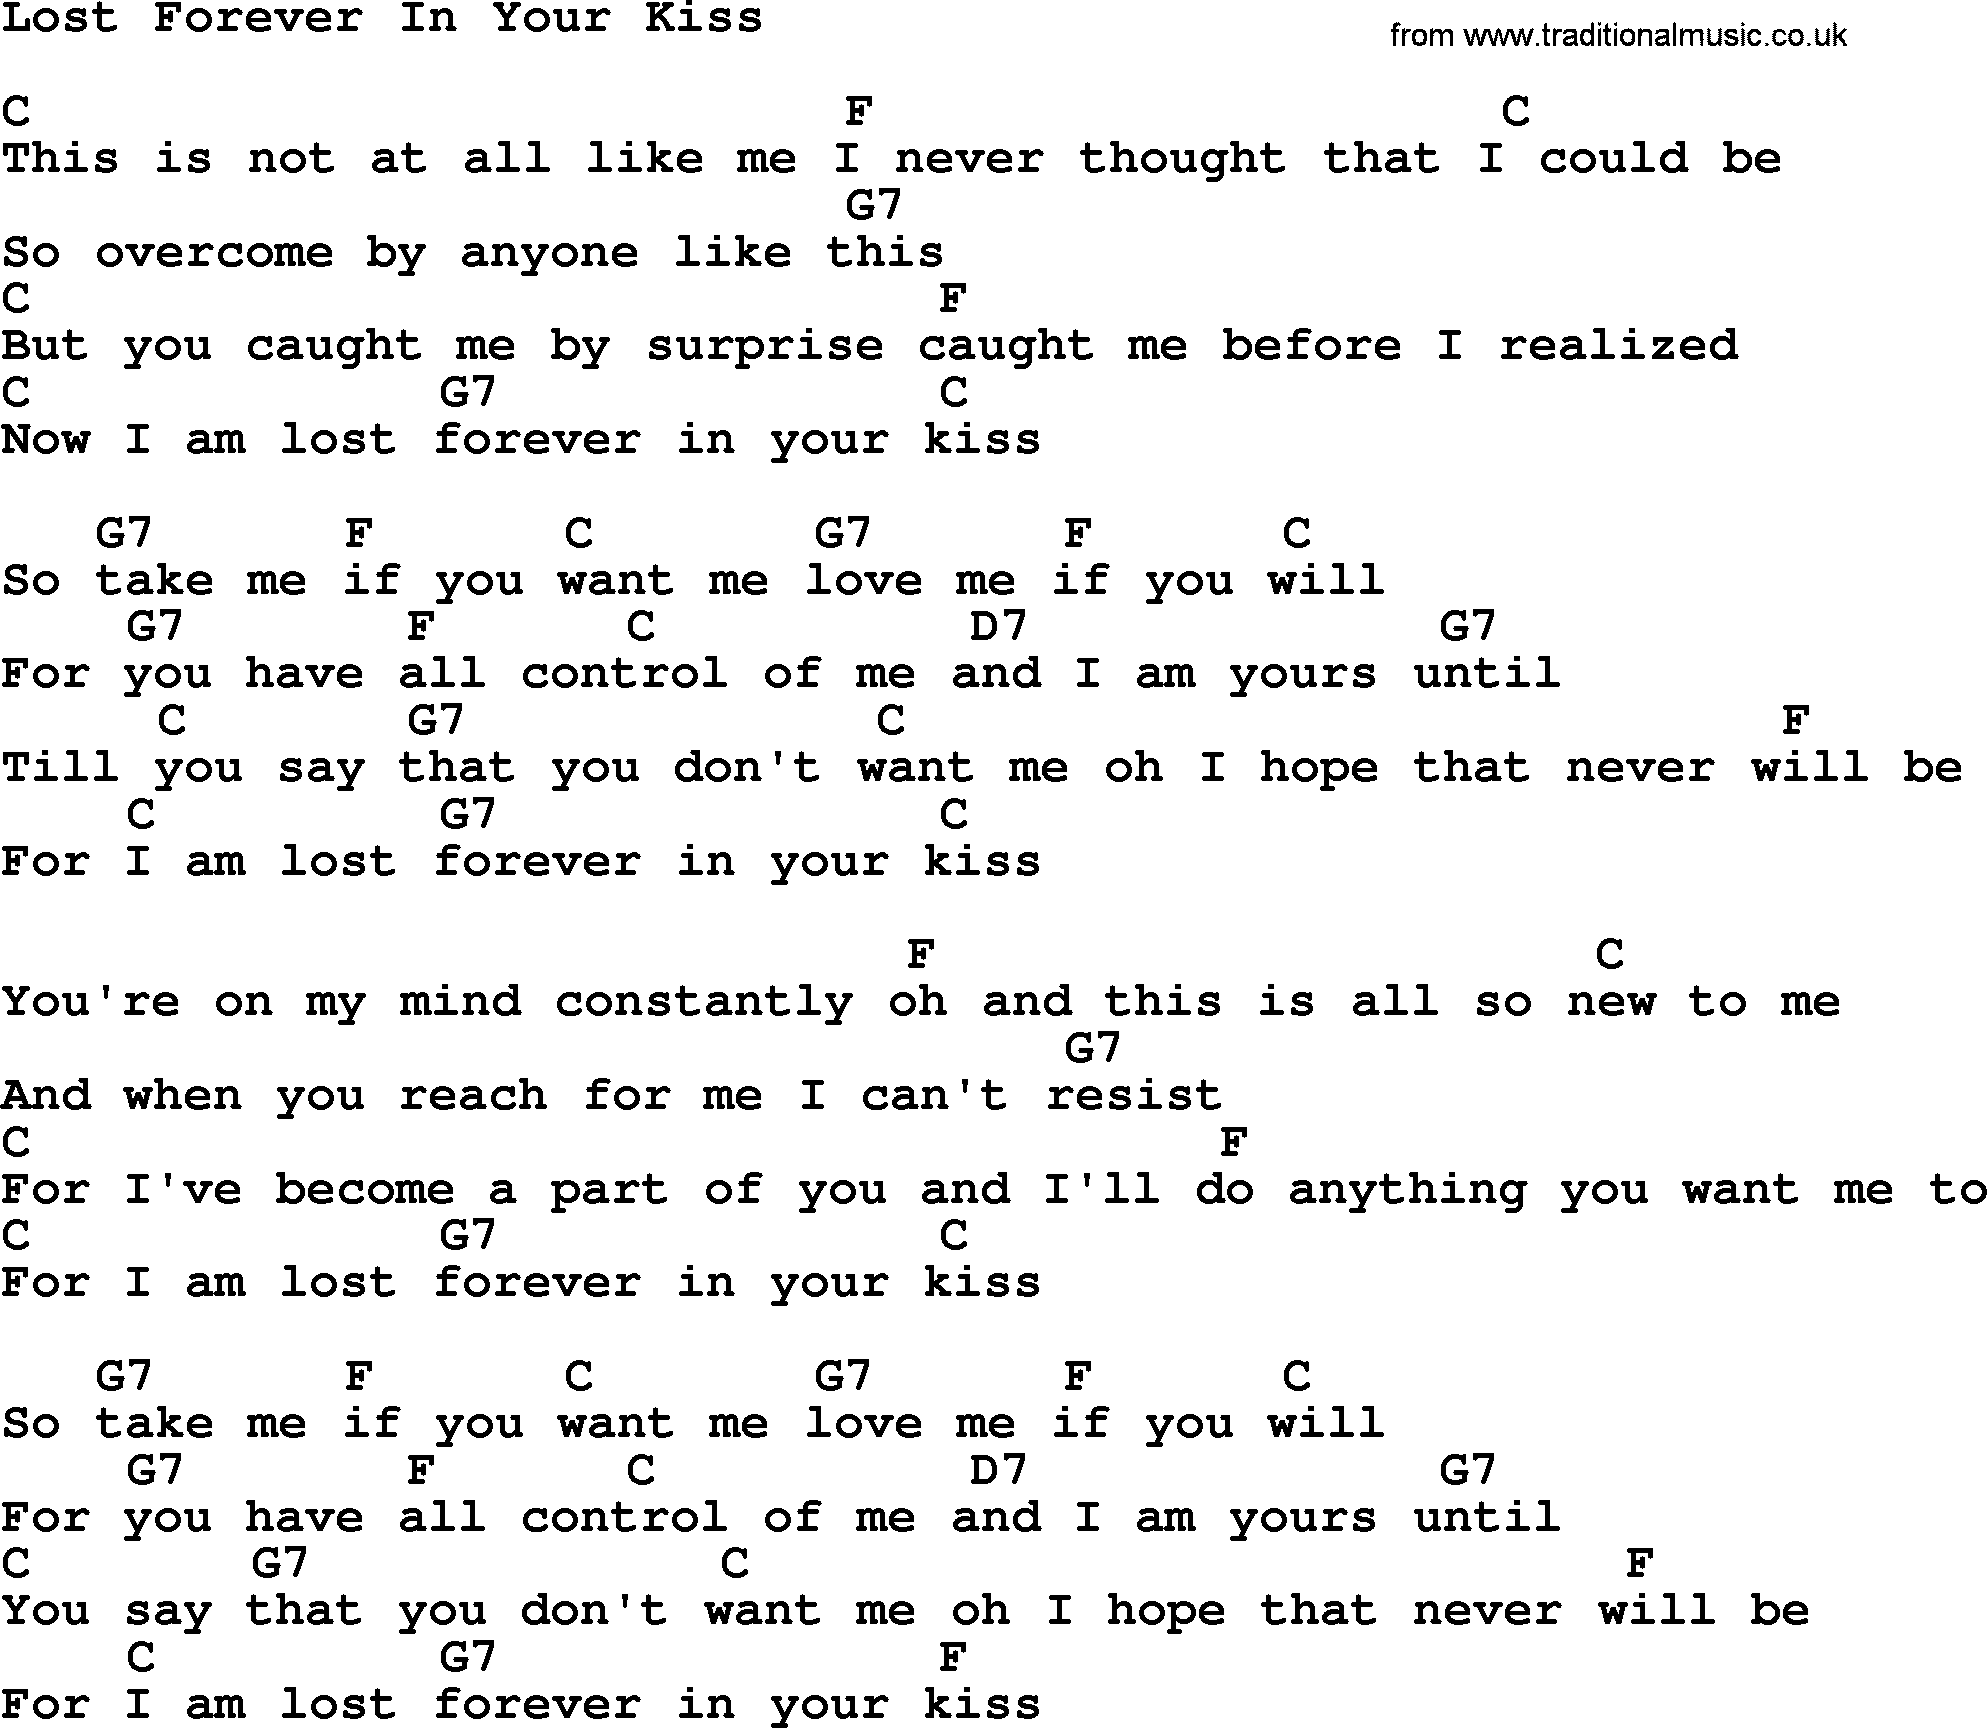 Dolly Parton song Lost Forever In Your Kiss, lyrics and chords